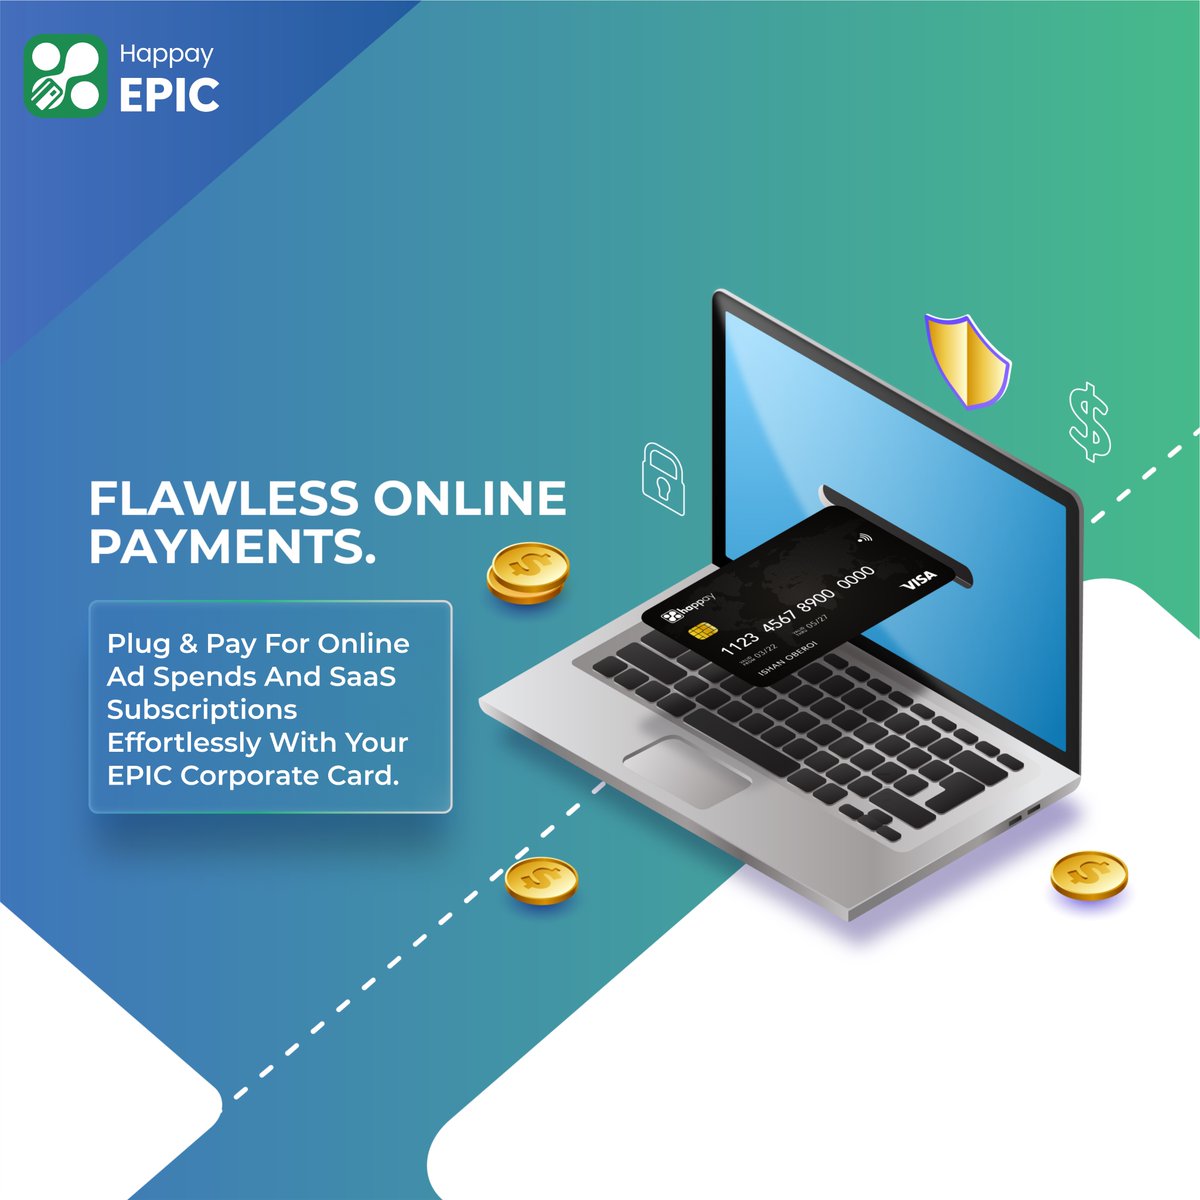 If you need your subscriptions to renew uninterrupted so that your online ads keep on churning out the desired results for your company, get The EPIC Corporate Payment Solution for your business today! 

#happay #happayEPIC #EPIC #corporatecard #corporate